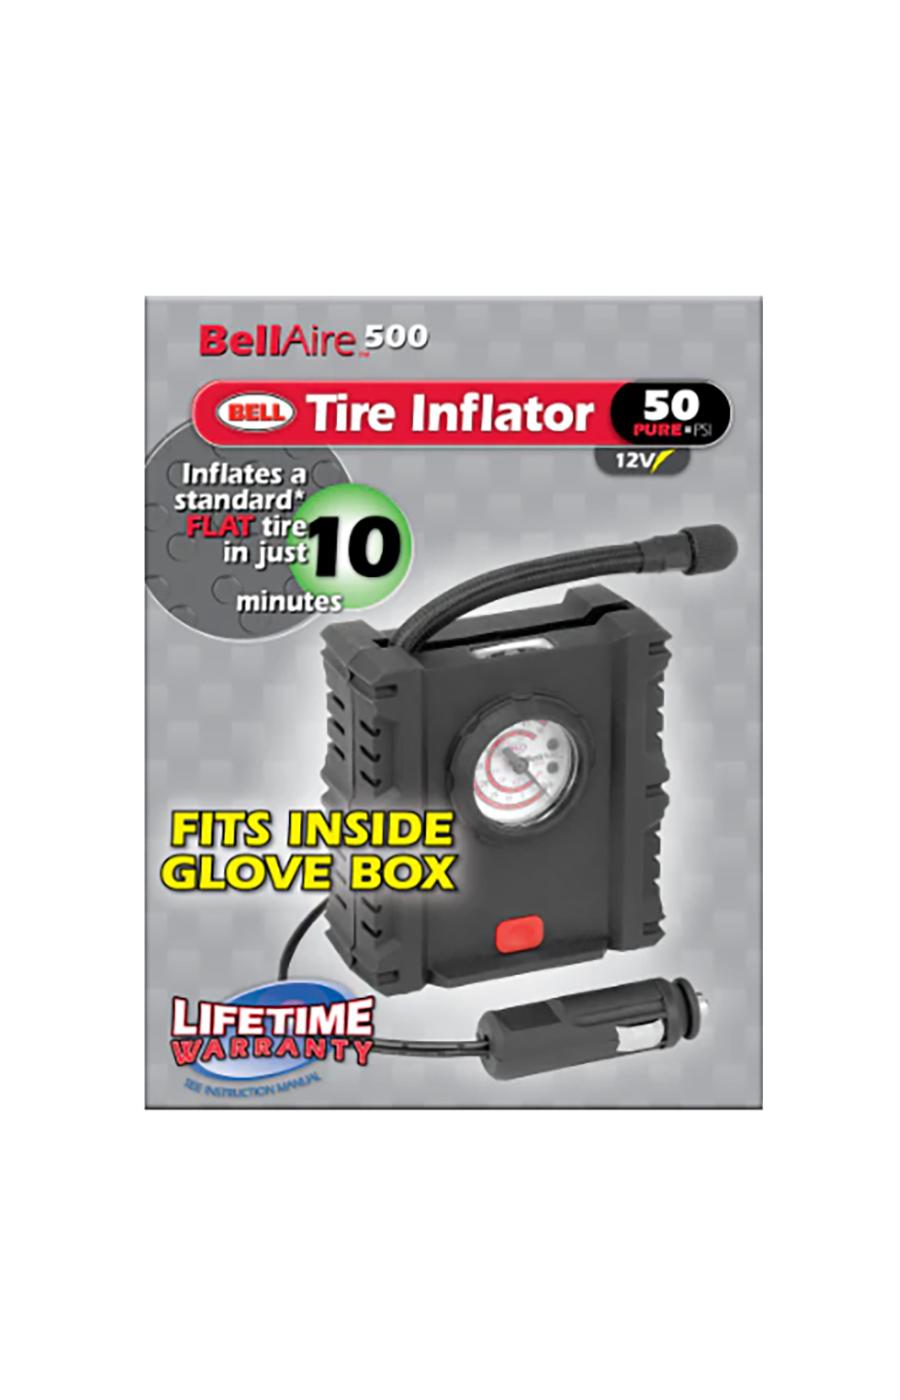 BELL BellAire 500 Tire Inflator; image 1 of 2